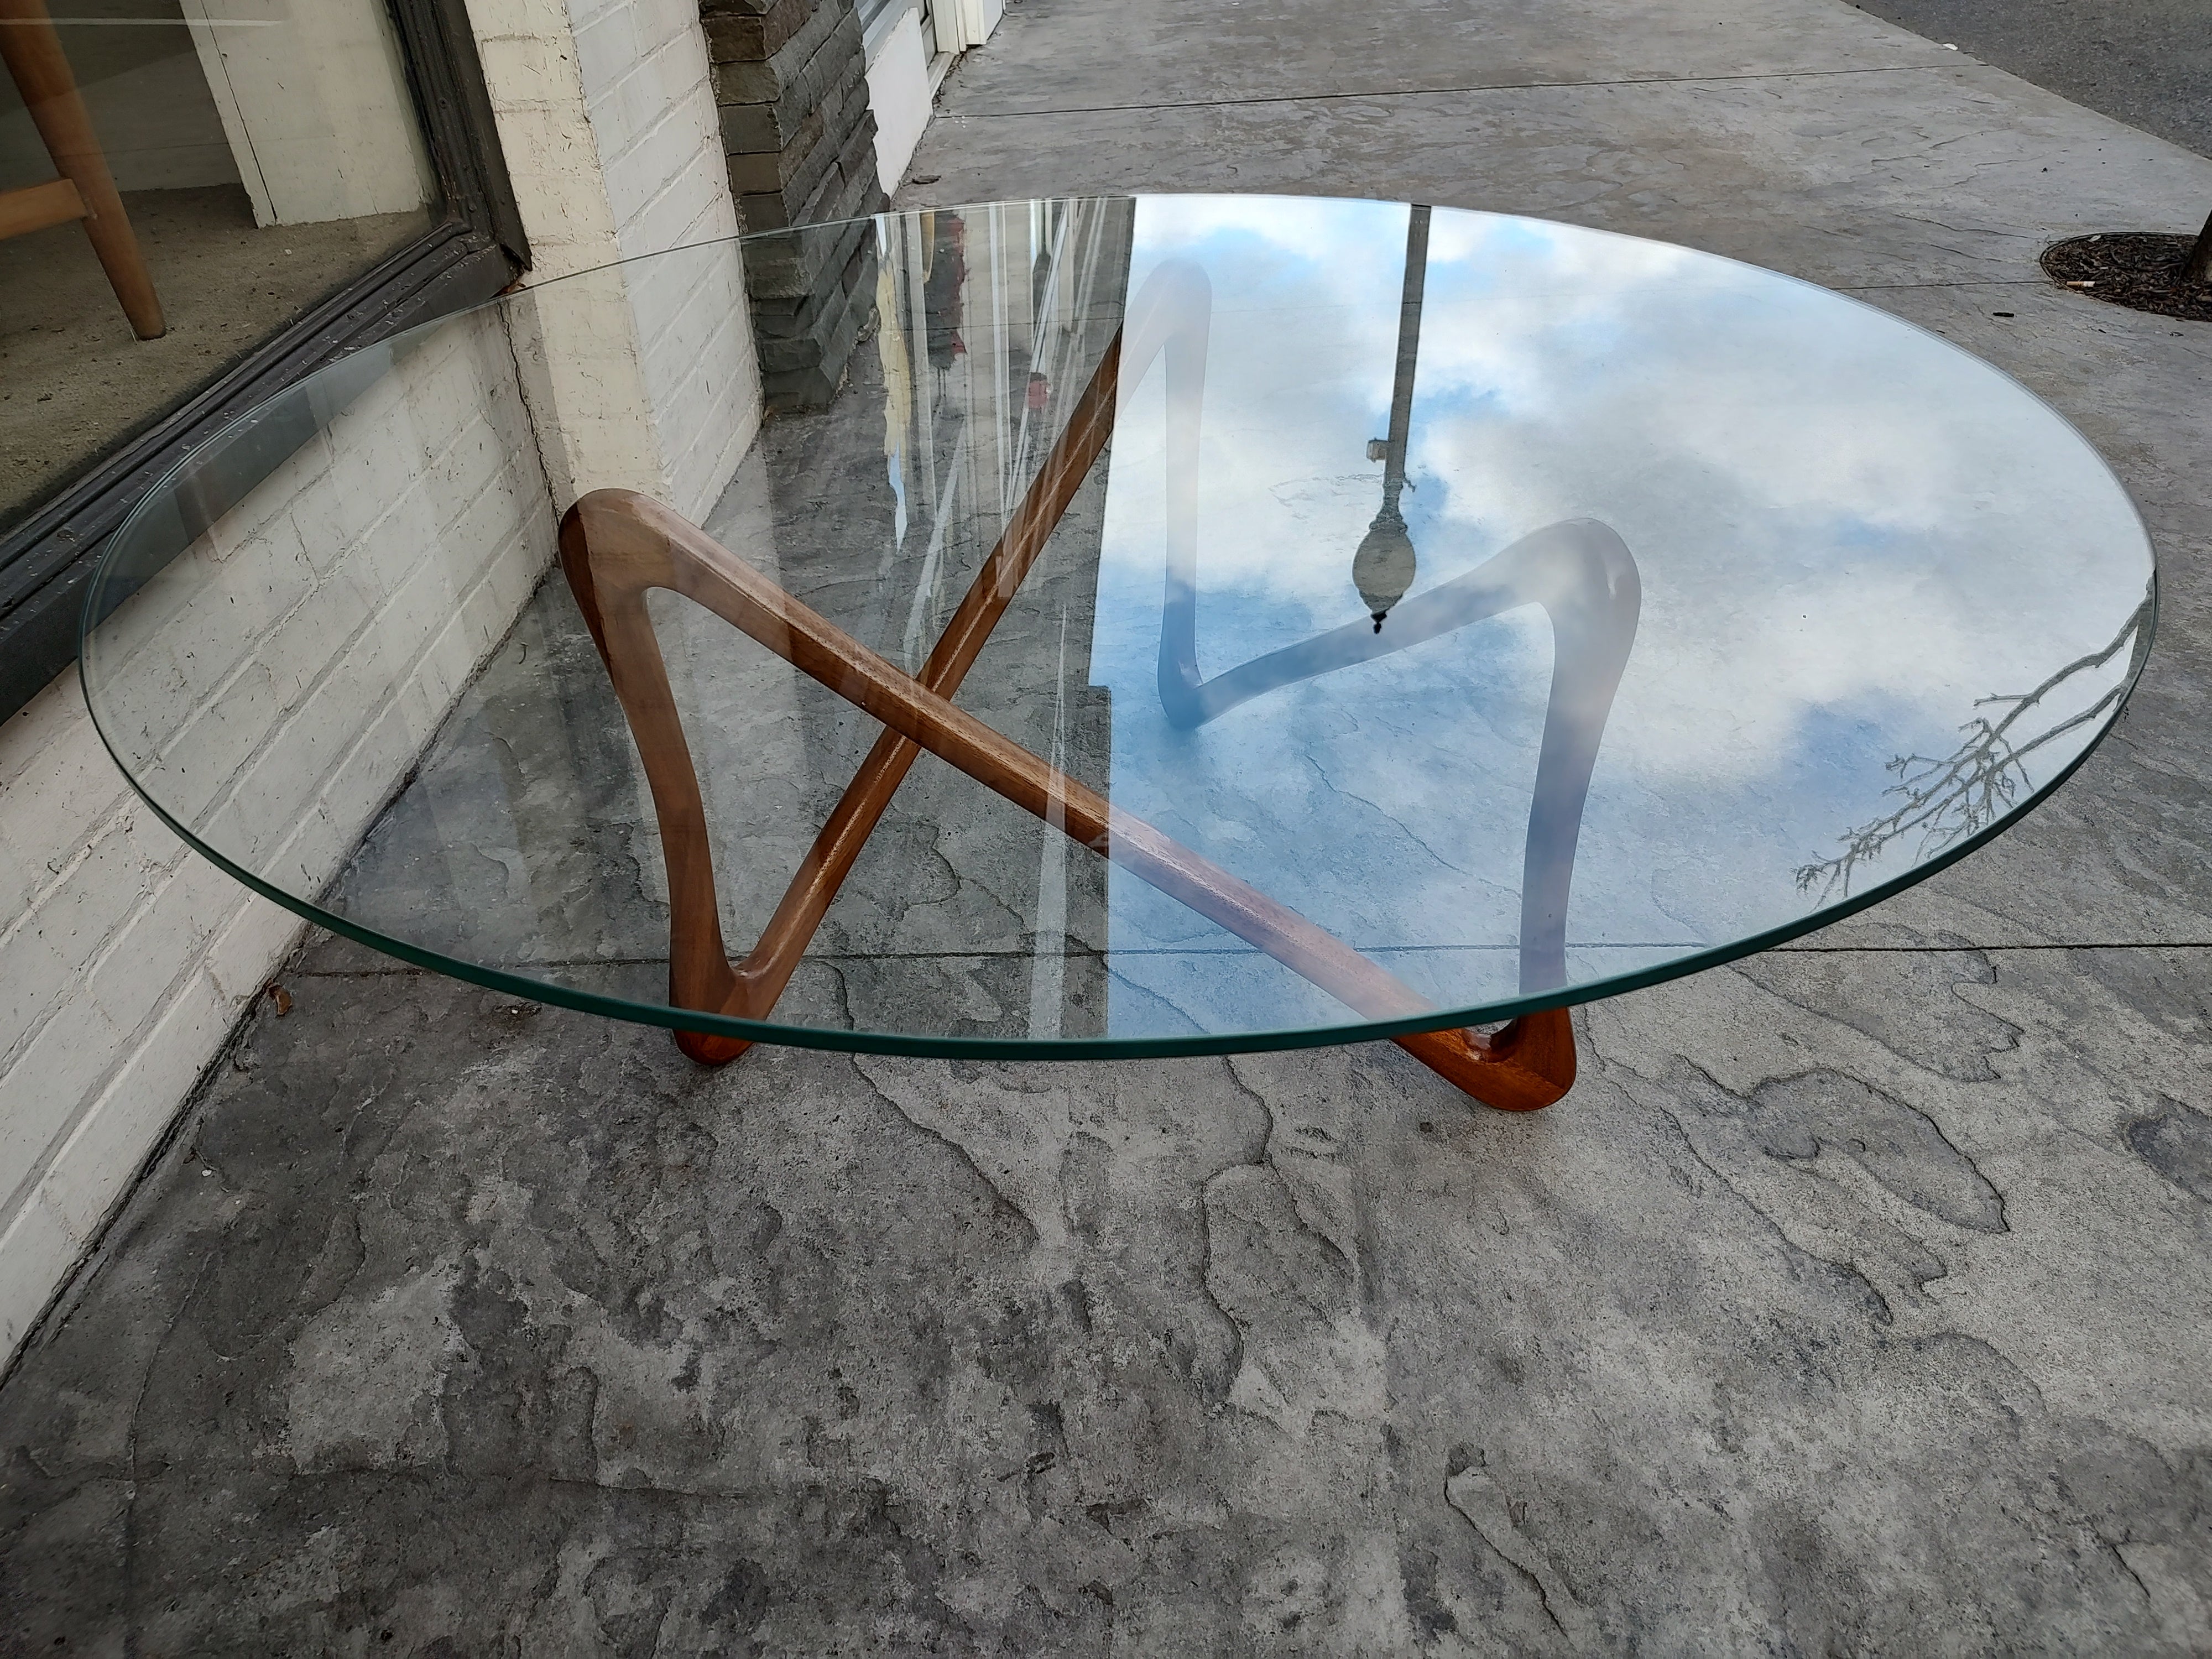 Fabulous sculpted walnut base with a large dimensional glass top. Beautiful creation in a rare form. In excellent vintage condition with minimal wear. Very tight frame.